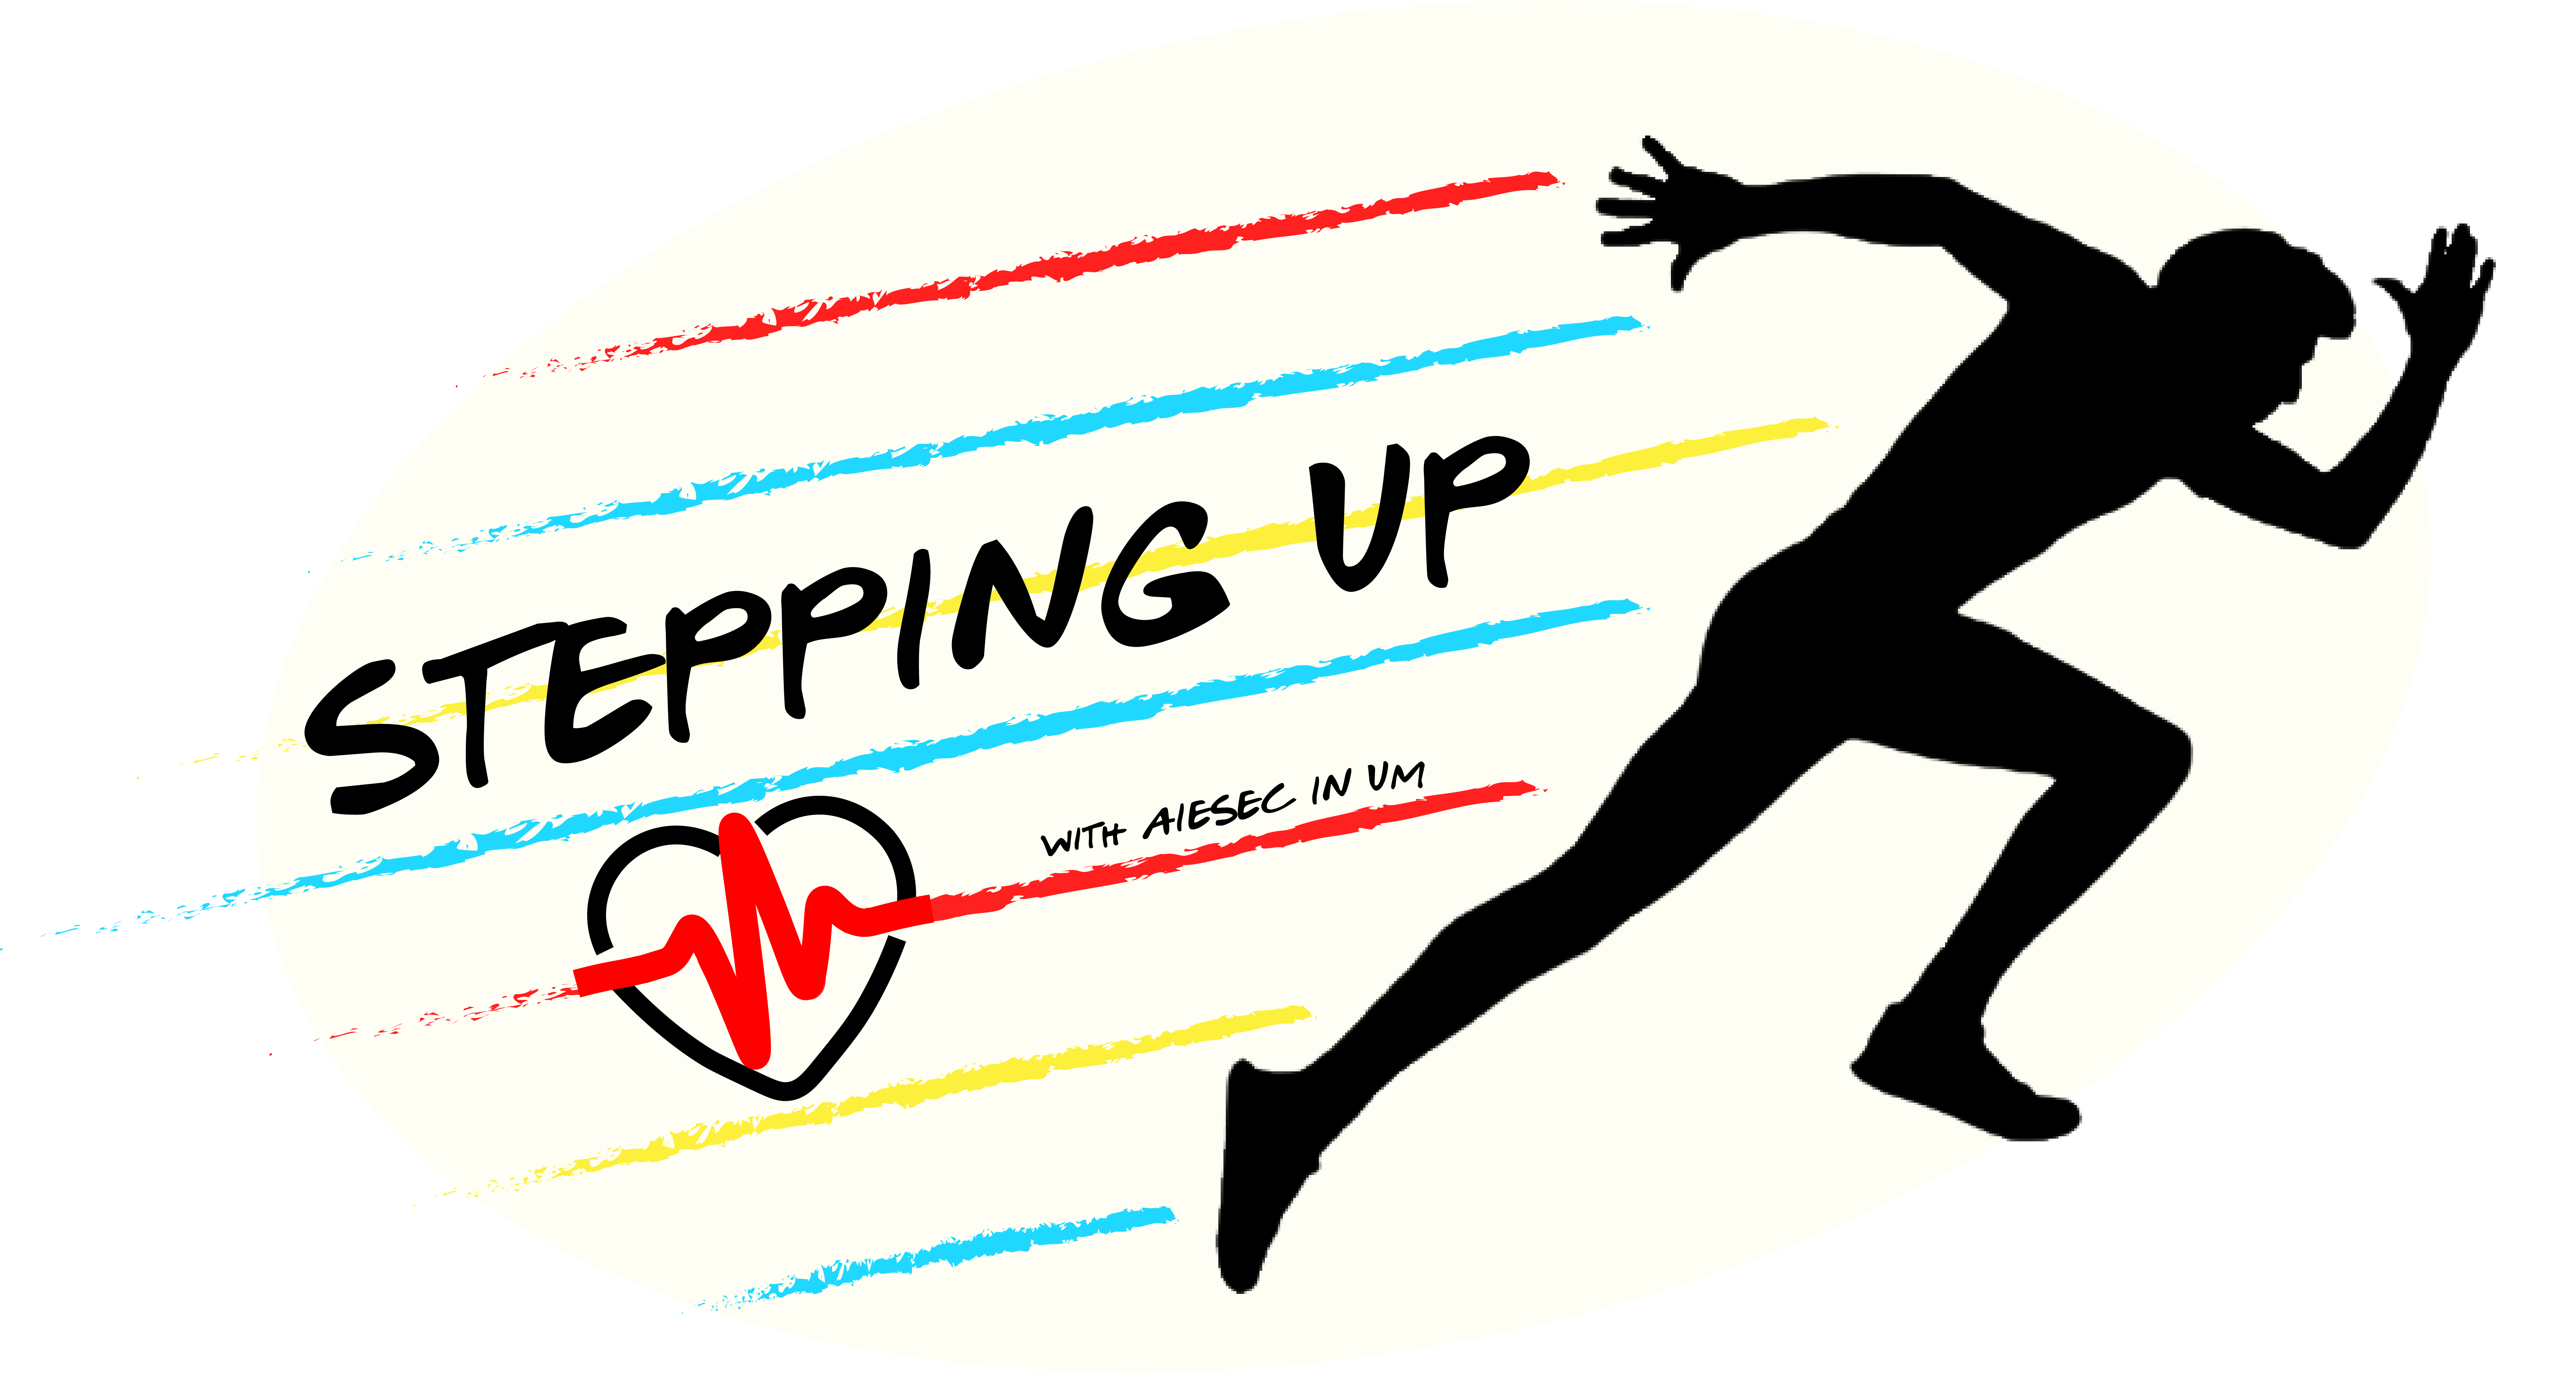 Logo of “Stepping Up with AIESEC in UM” Virtual Run 2021